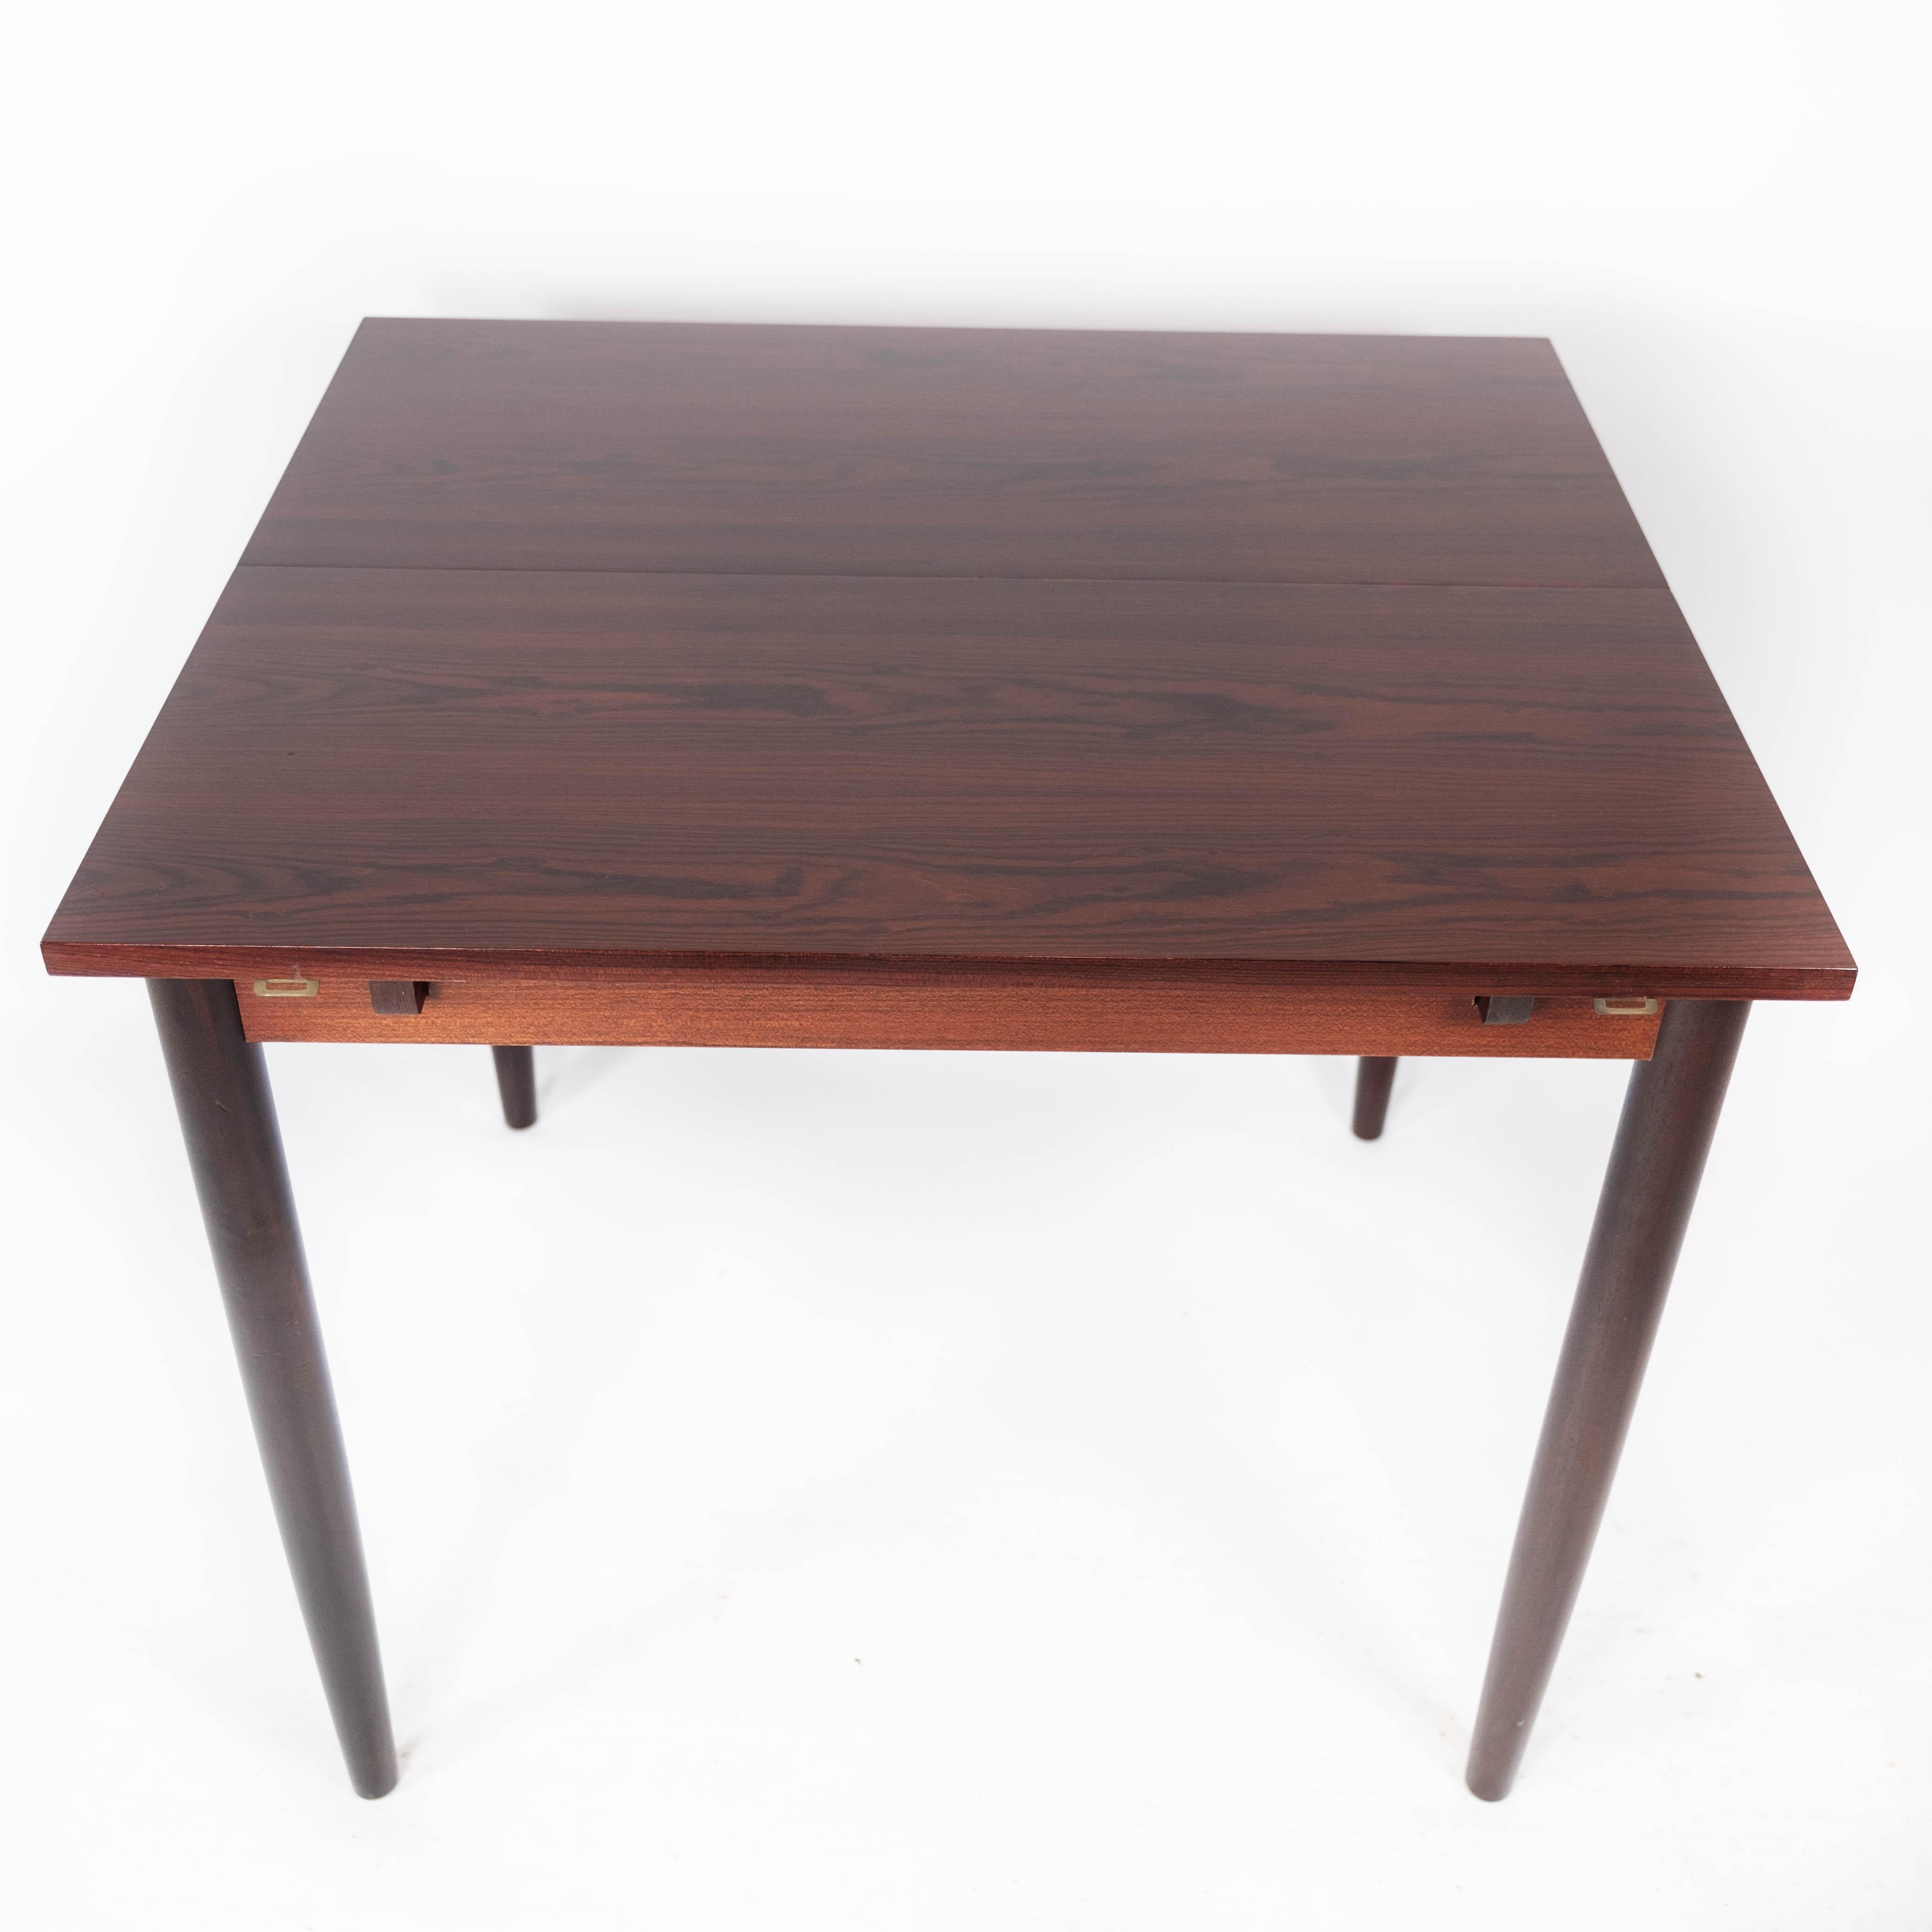 Dining Table Made In Rosewood With Extension Plates By Arne Vodder From 1960s In Good Condition For Sale In Lejre, DK